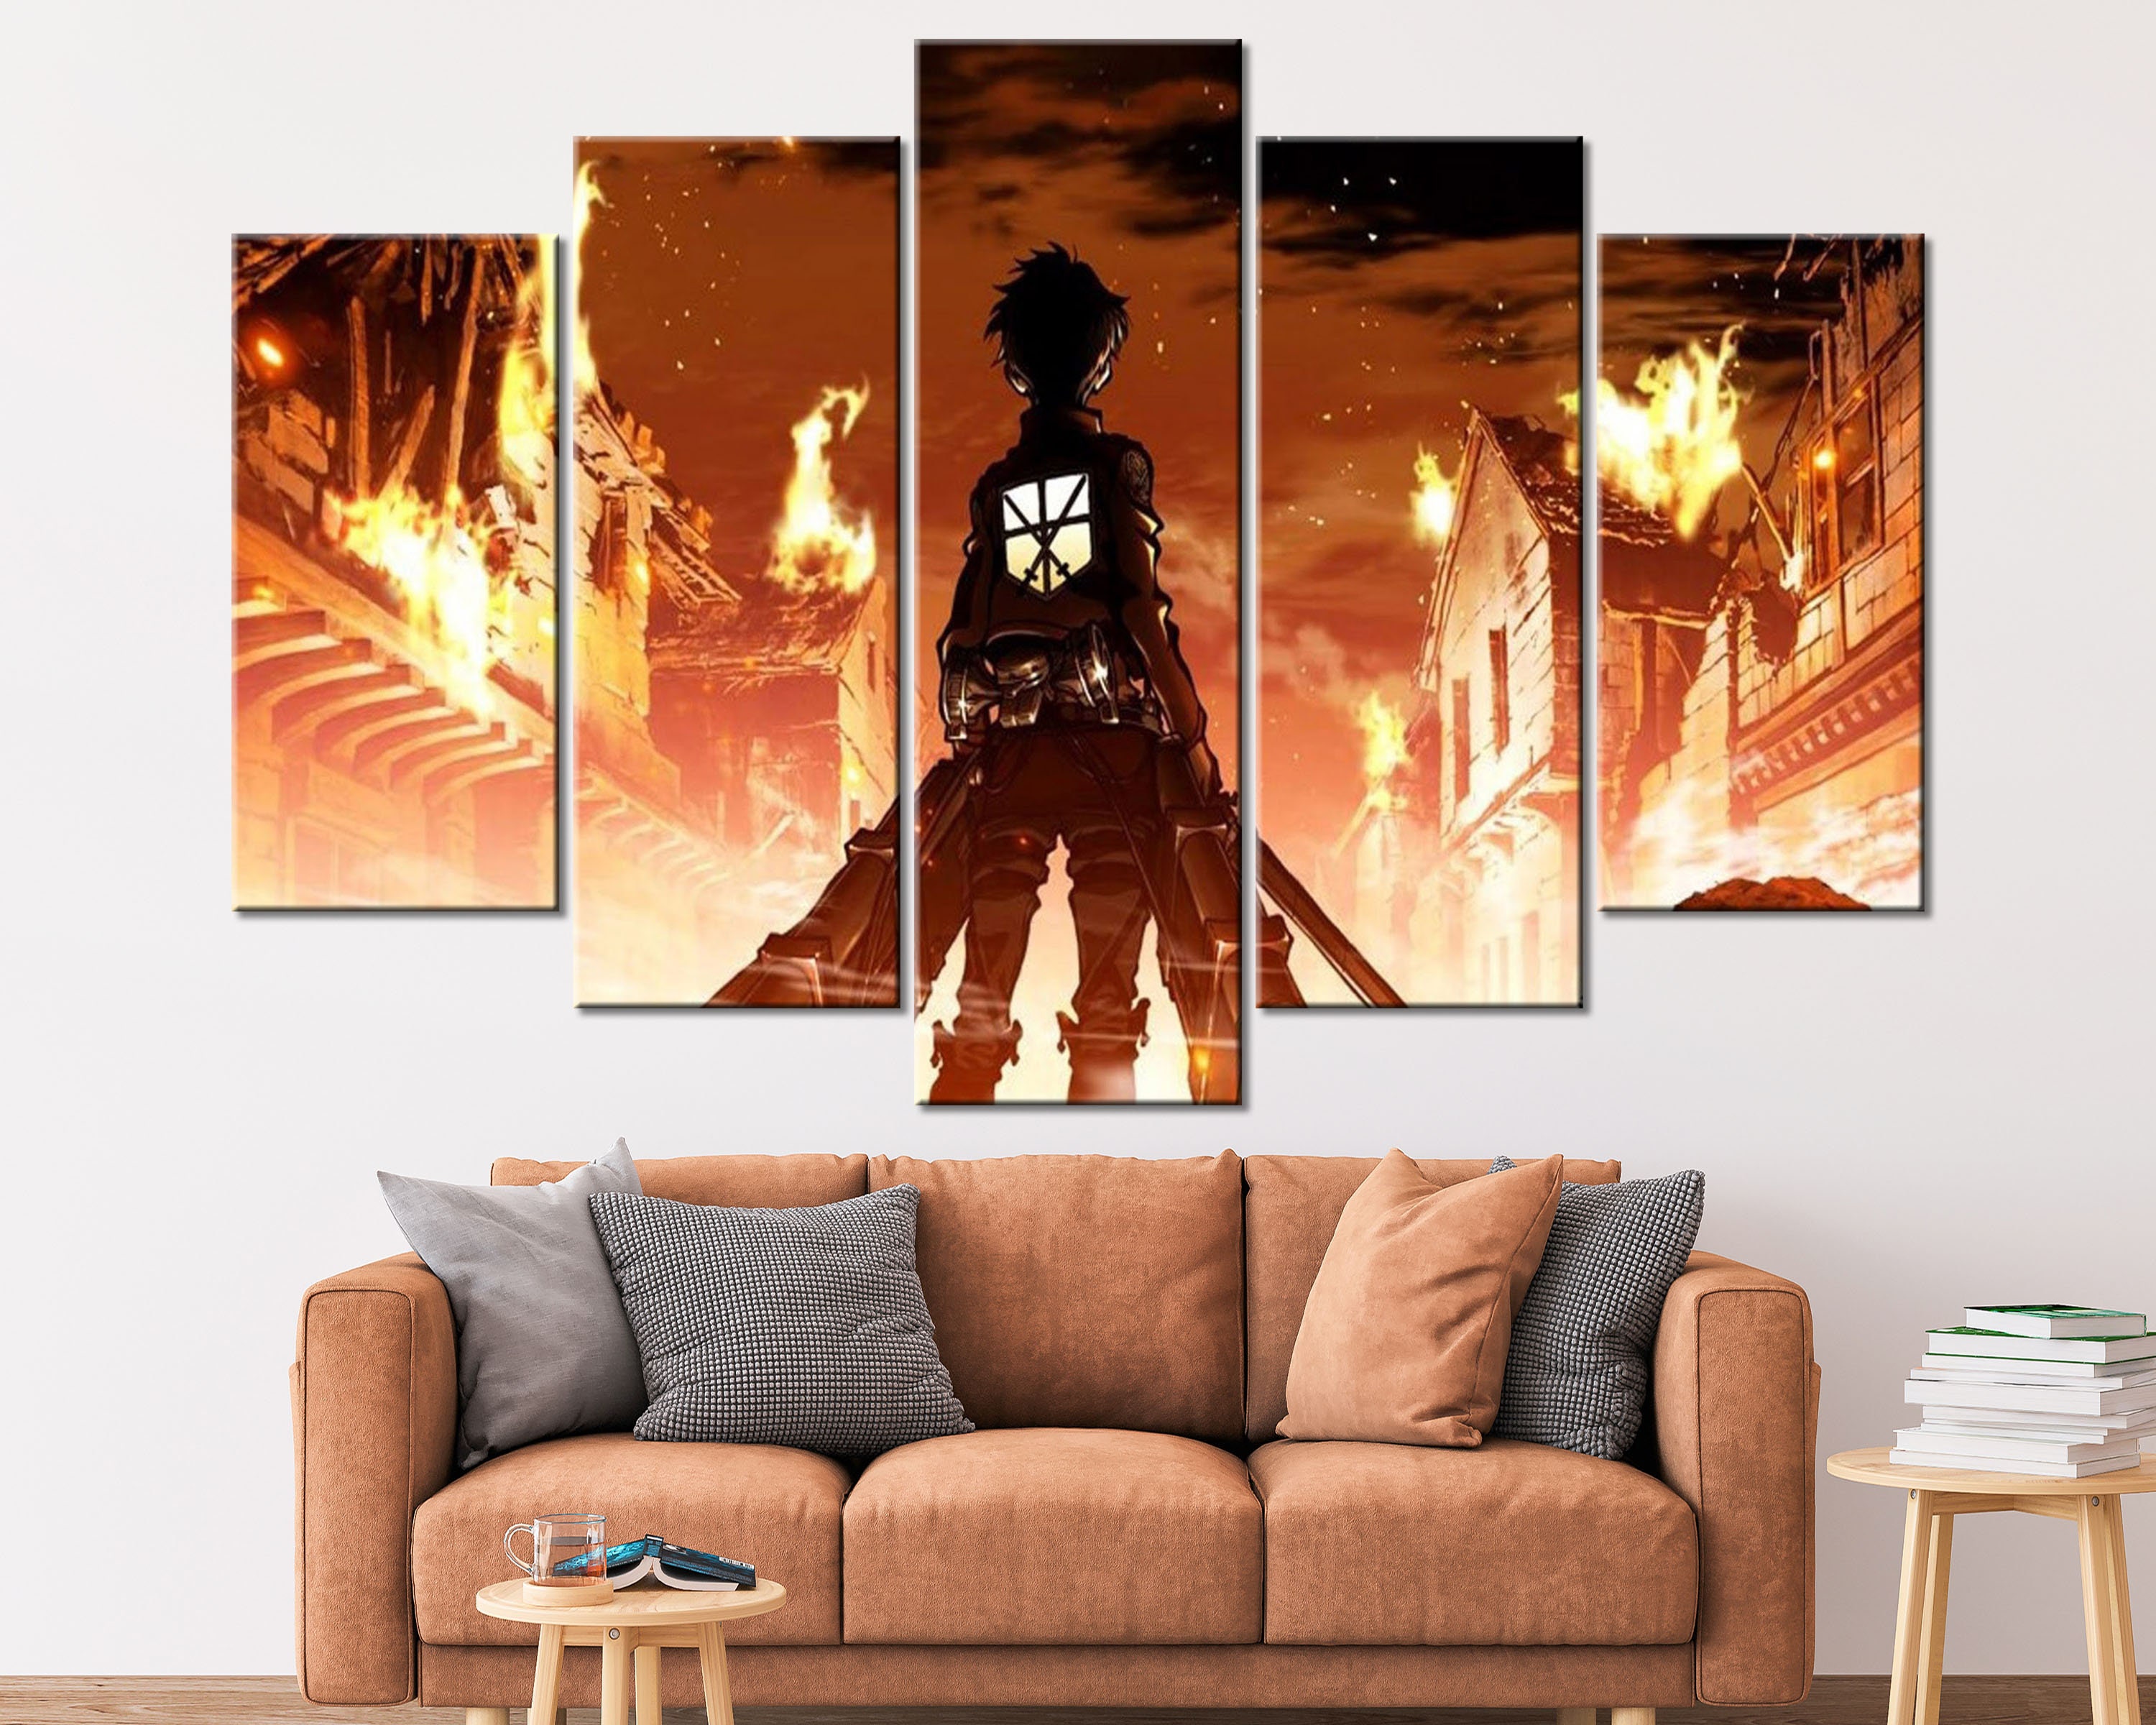 JOOCAR Japanese Samurai Art Decor Tapestry Wall Hanging for Bedroom Cool  Anime Red and Black Sun